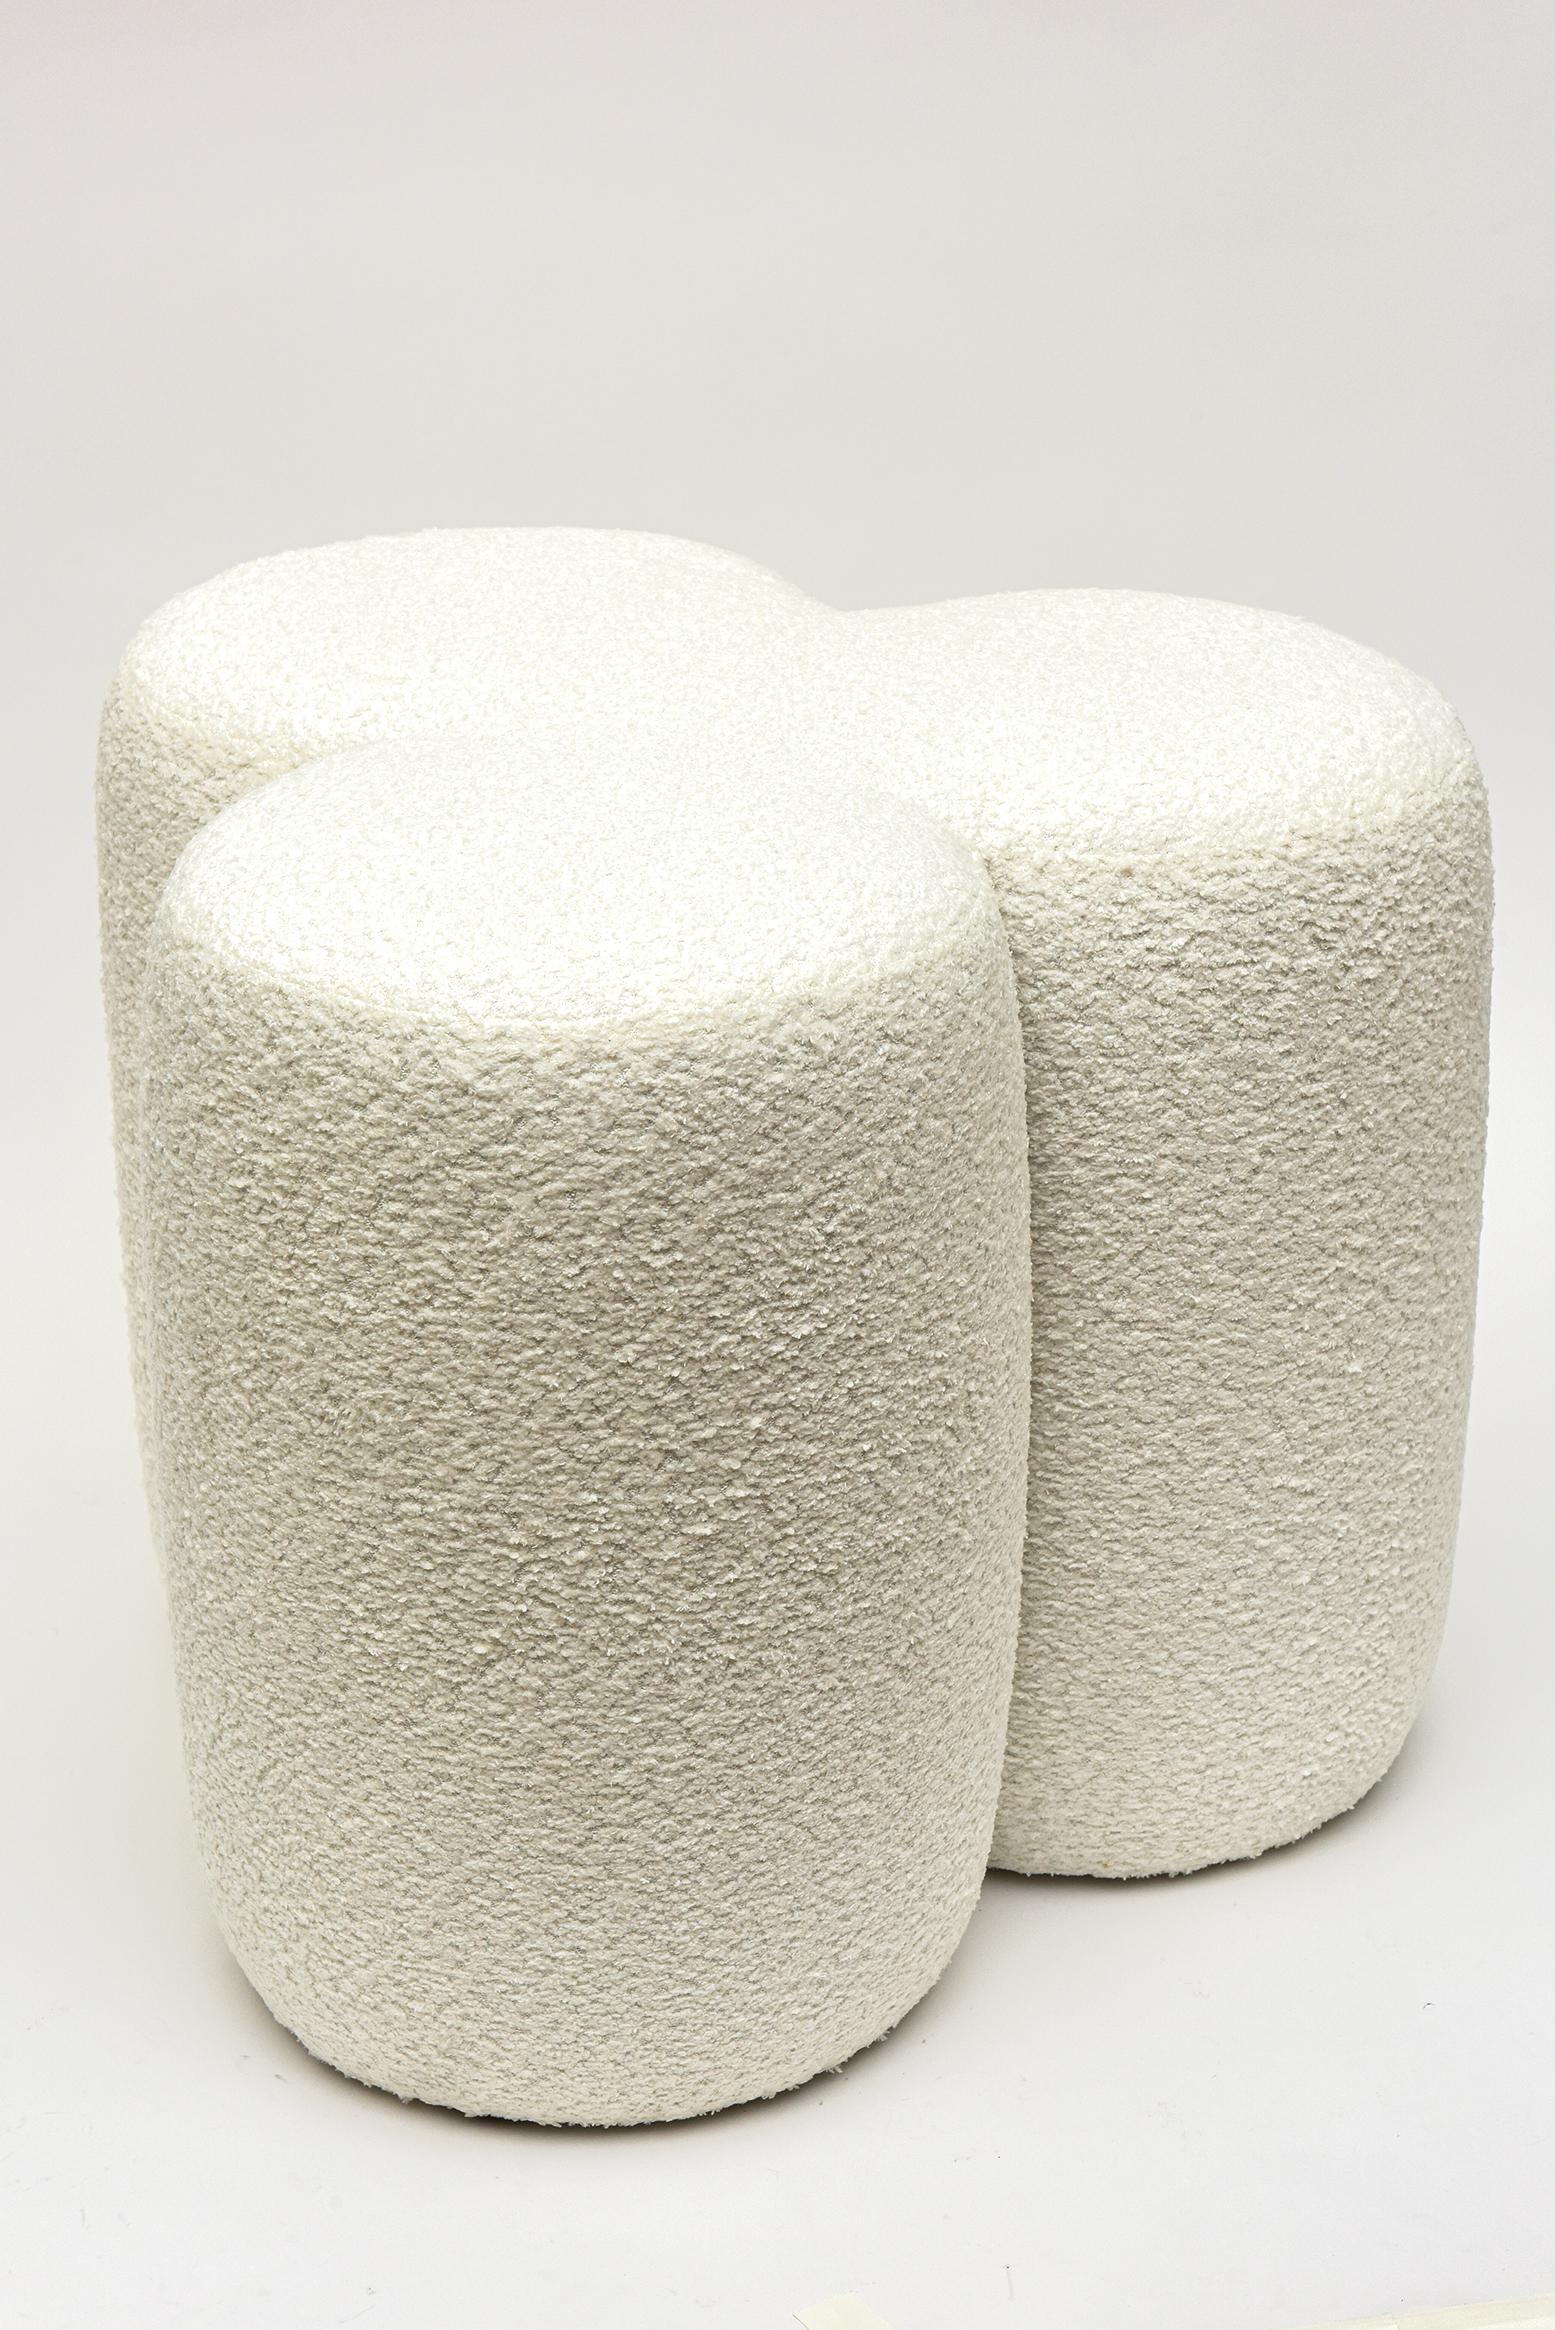 Modern Pair of Custom Upholstered White Bouclé Cloud Ottomans or Benches 